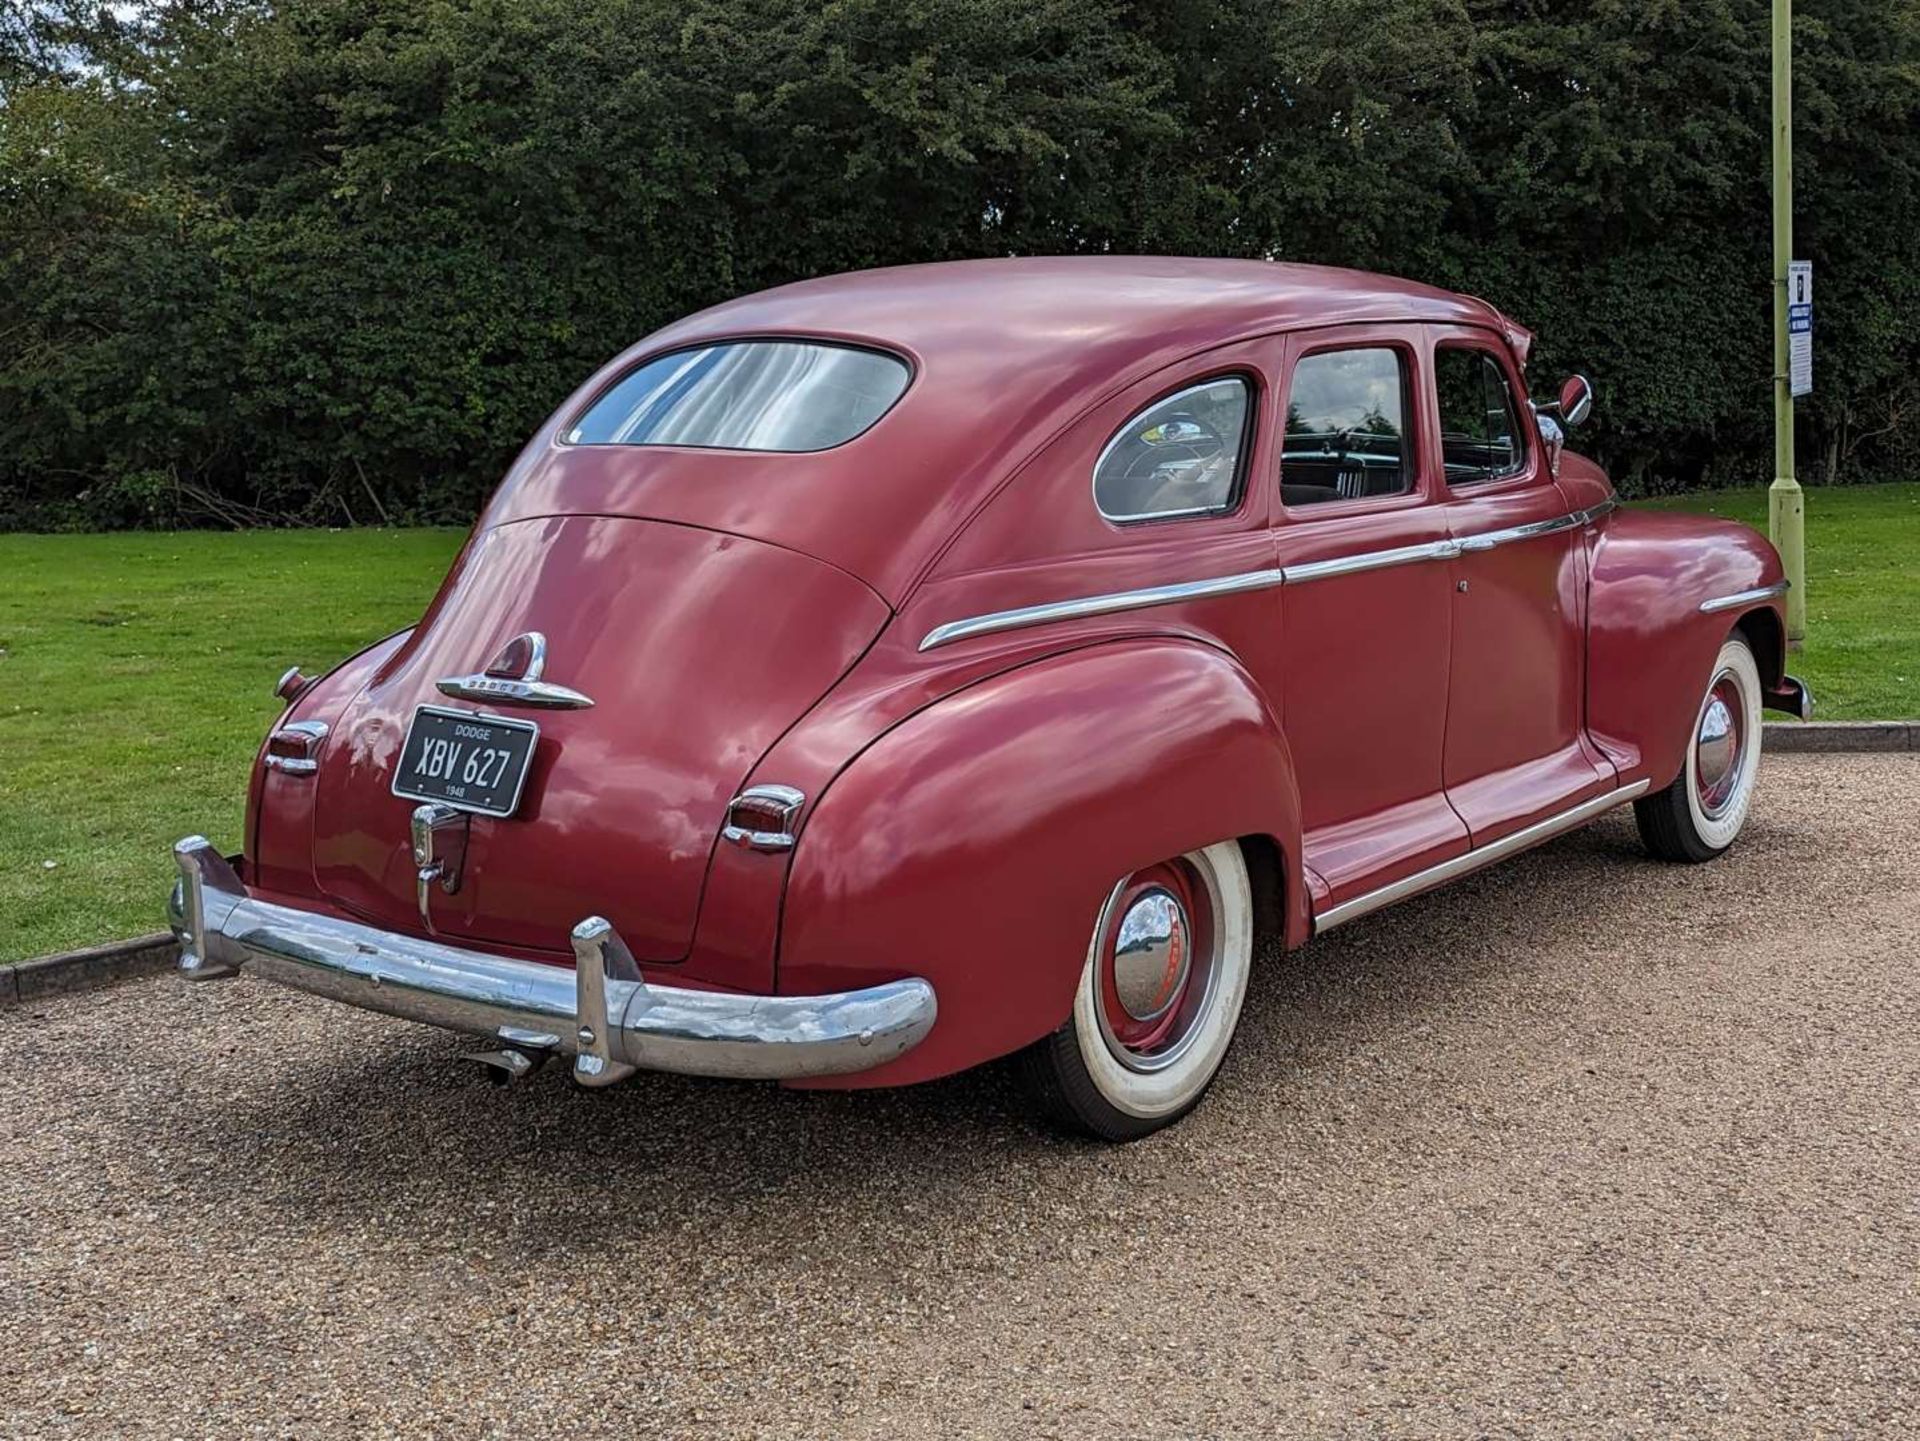 1947 DODGE SPECIAL DELUXE LHD - Image 7 of 30